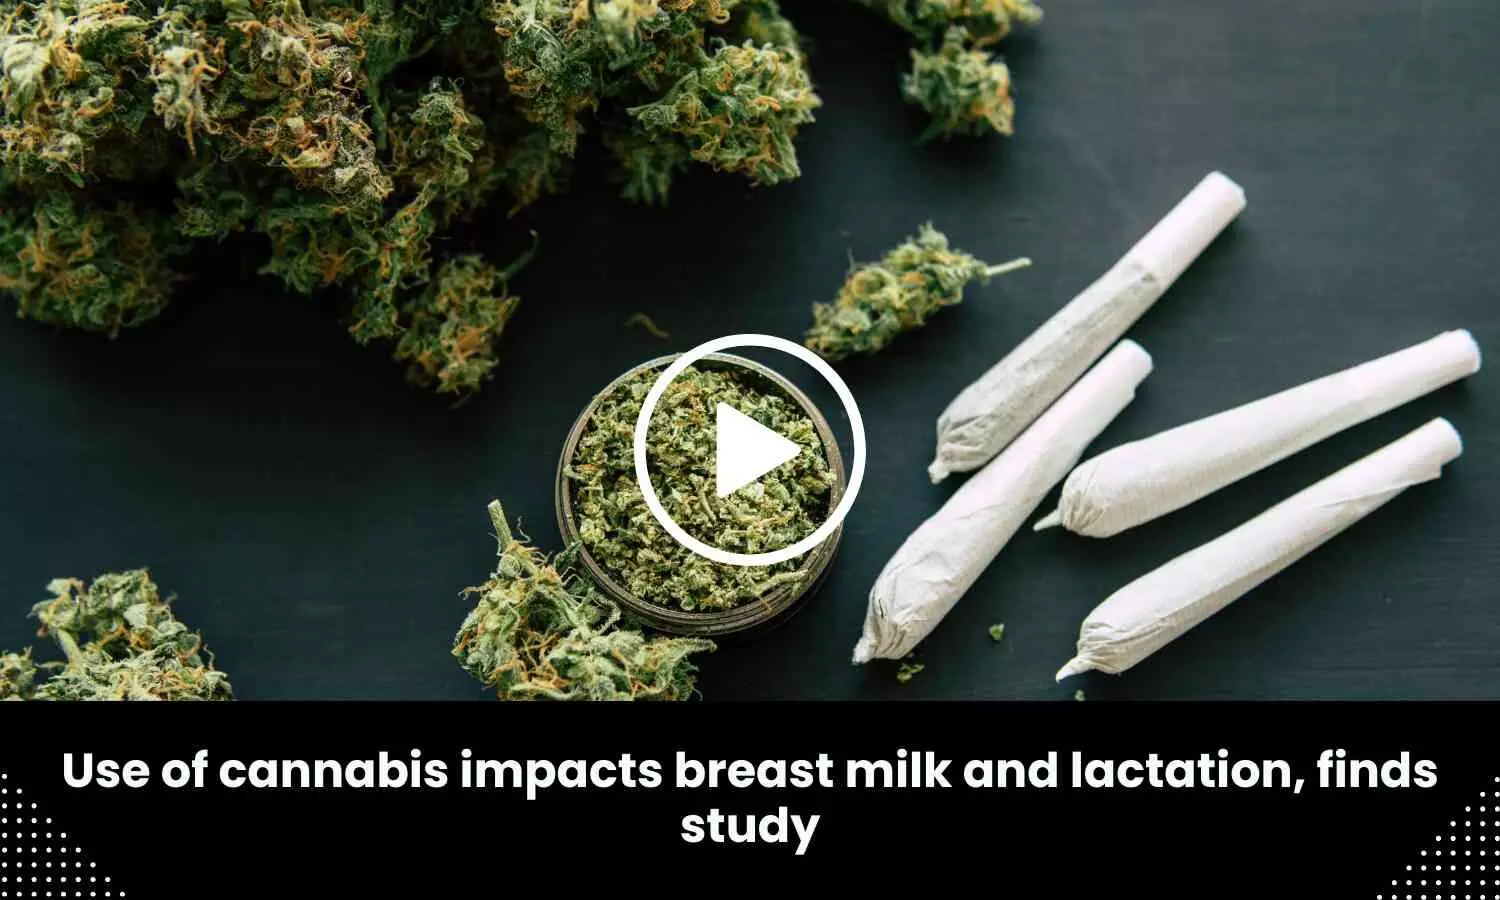 Use of cannabis impacts breast milk and lactation, finds study